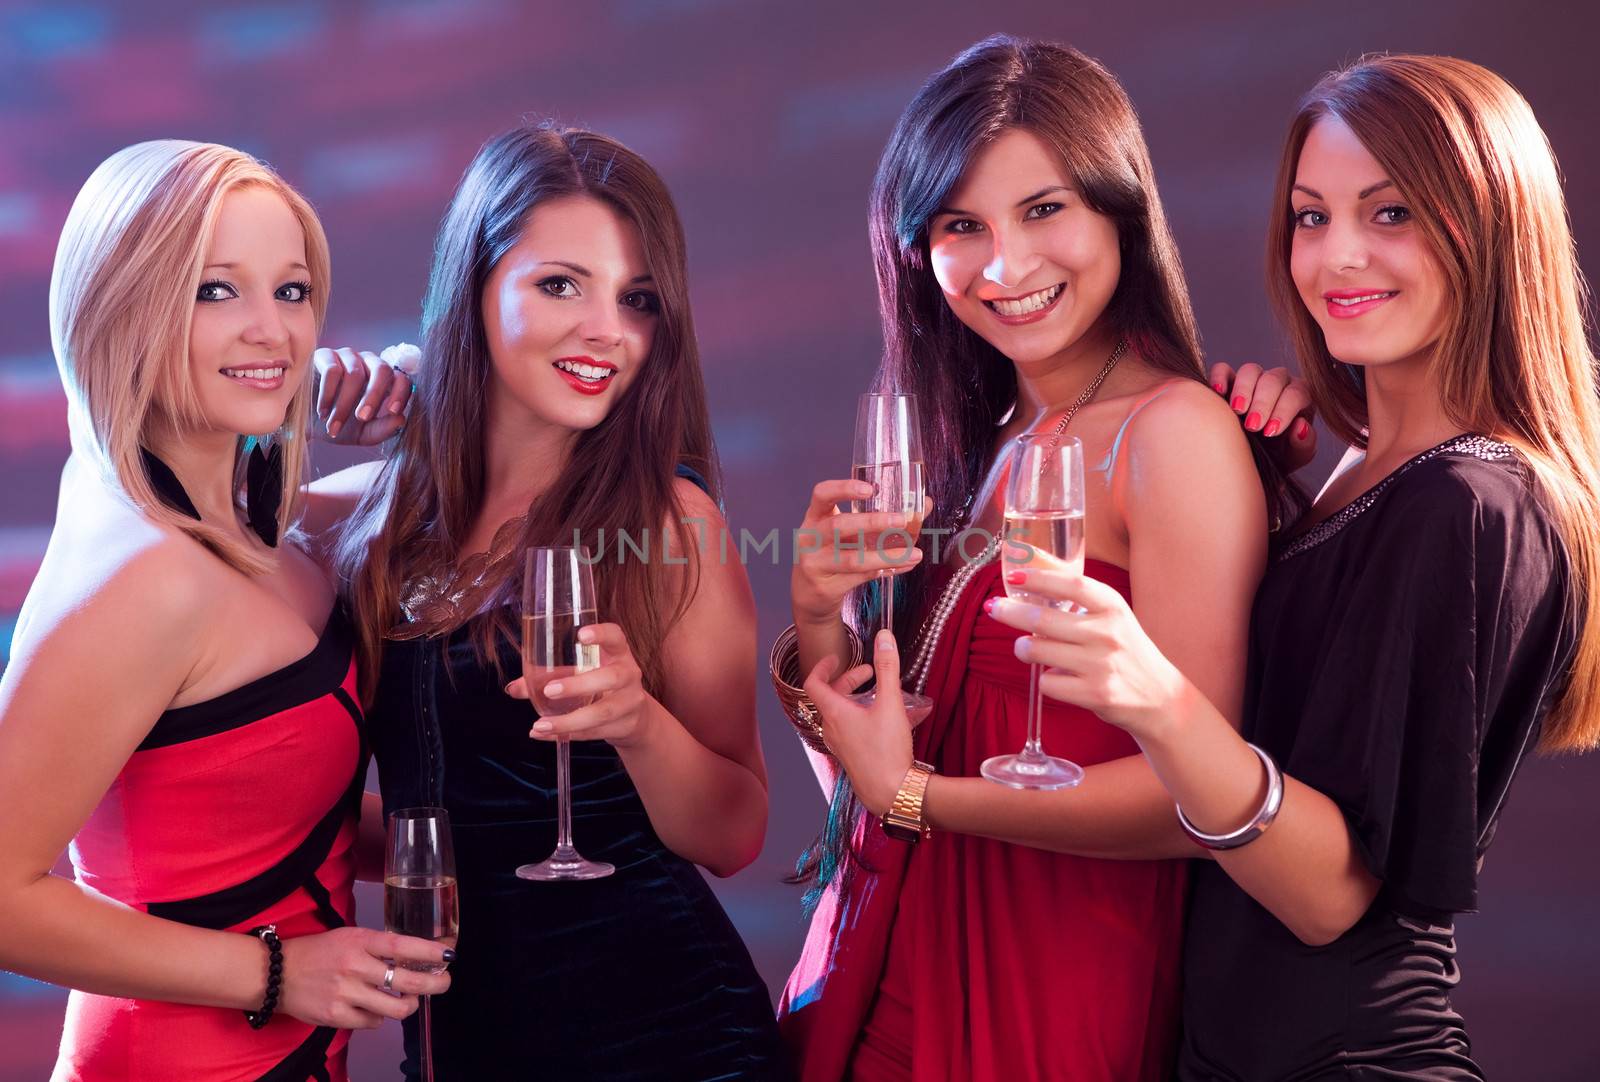 Group of four stylish women standing in a row toasting with flutes of champagne